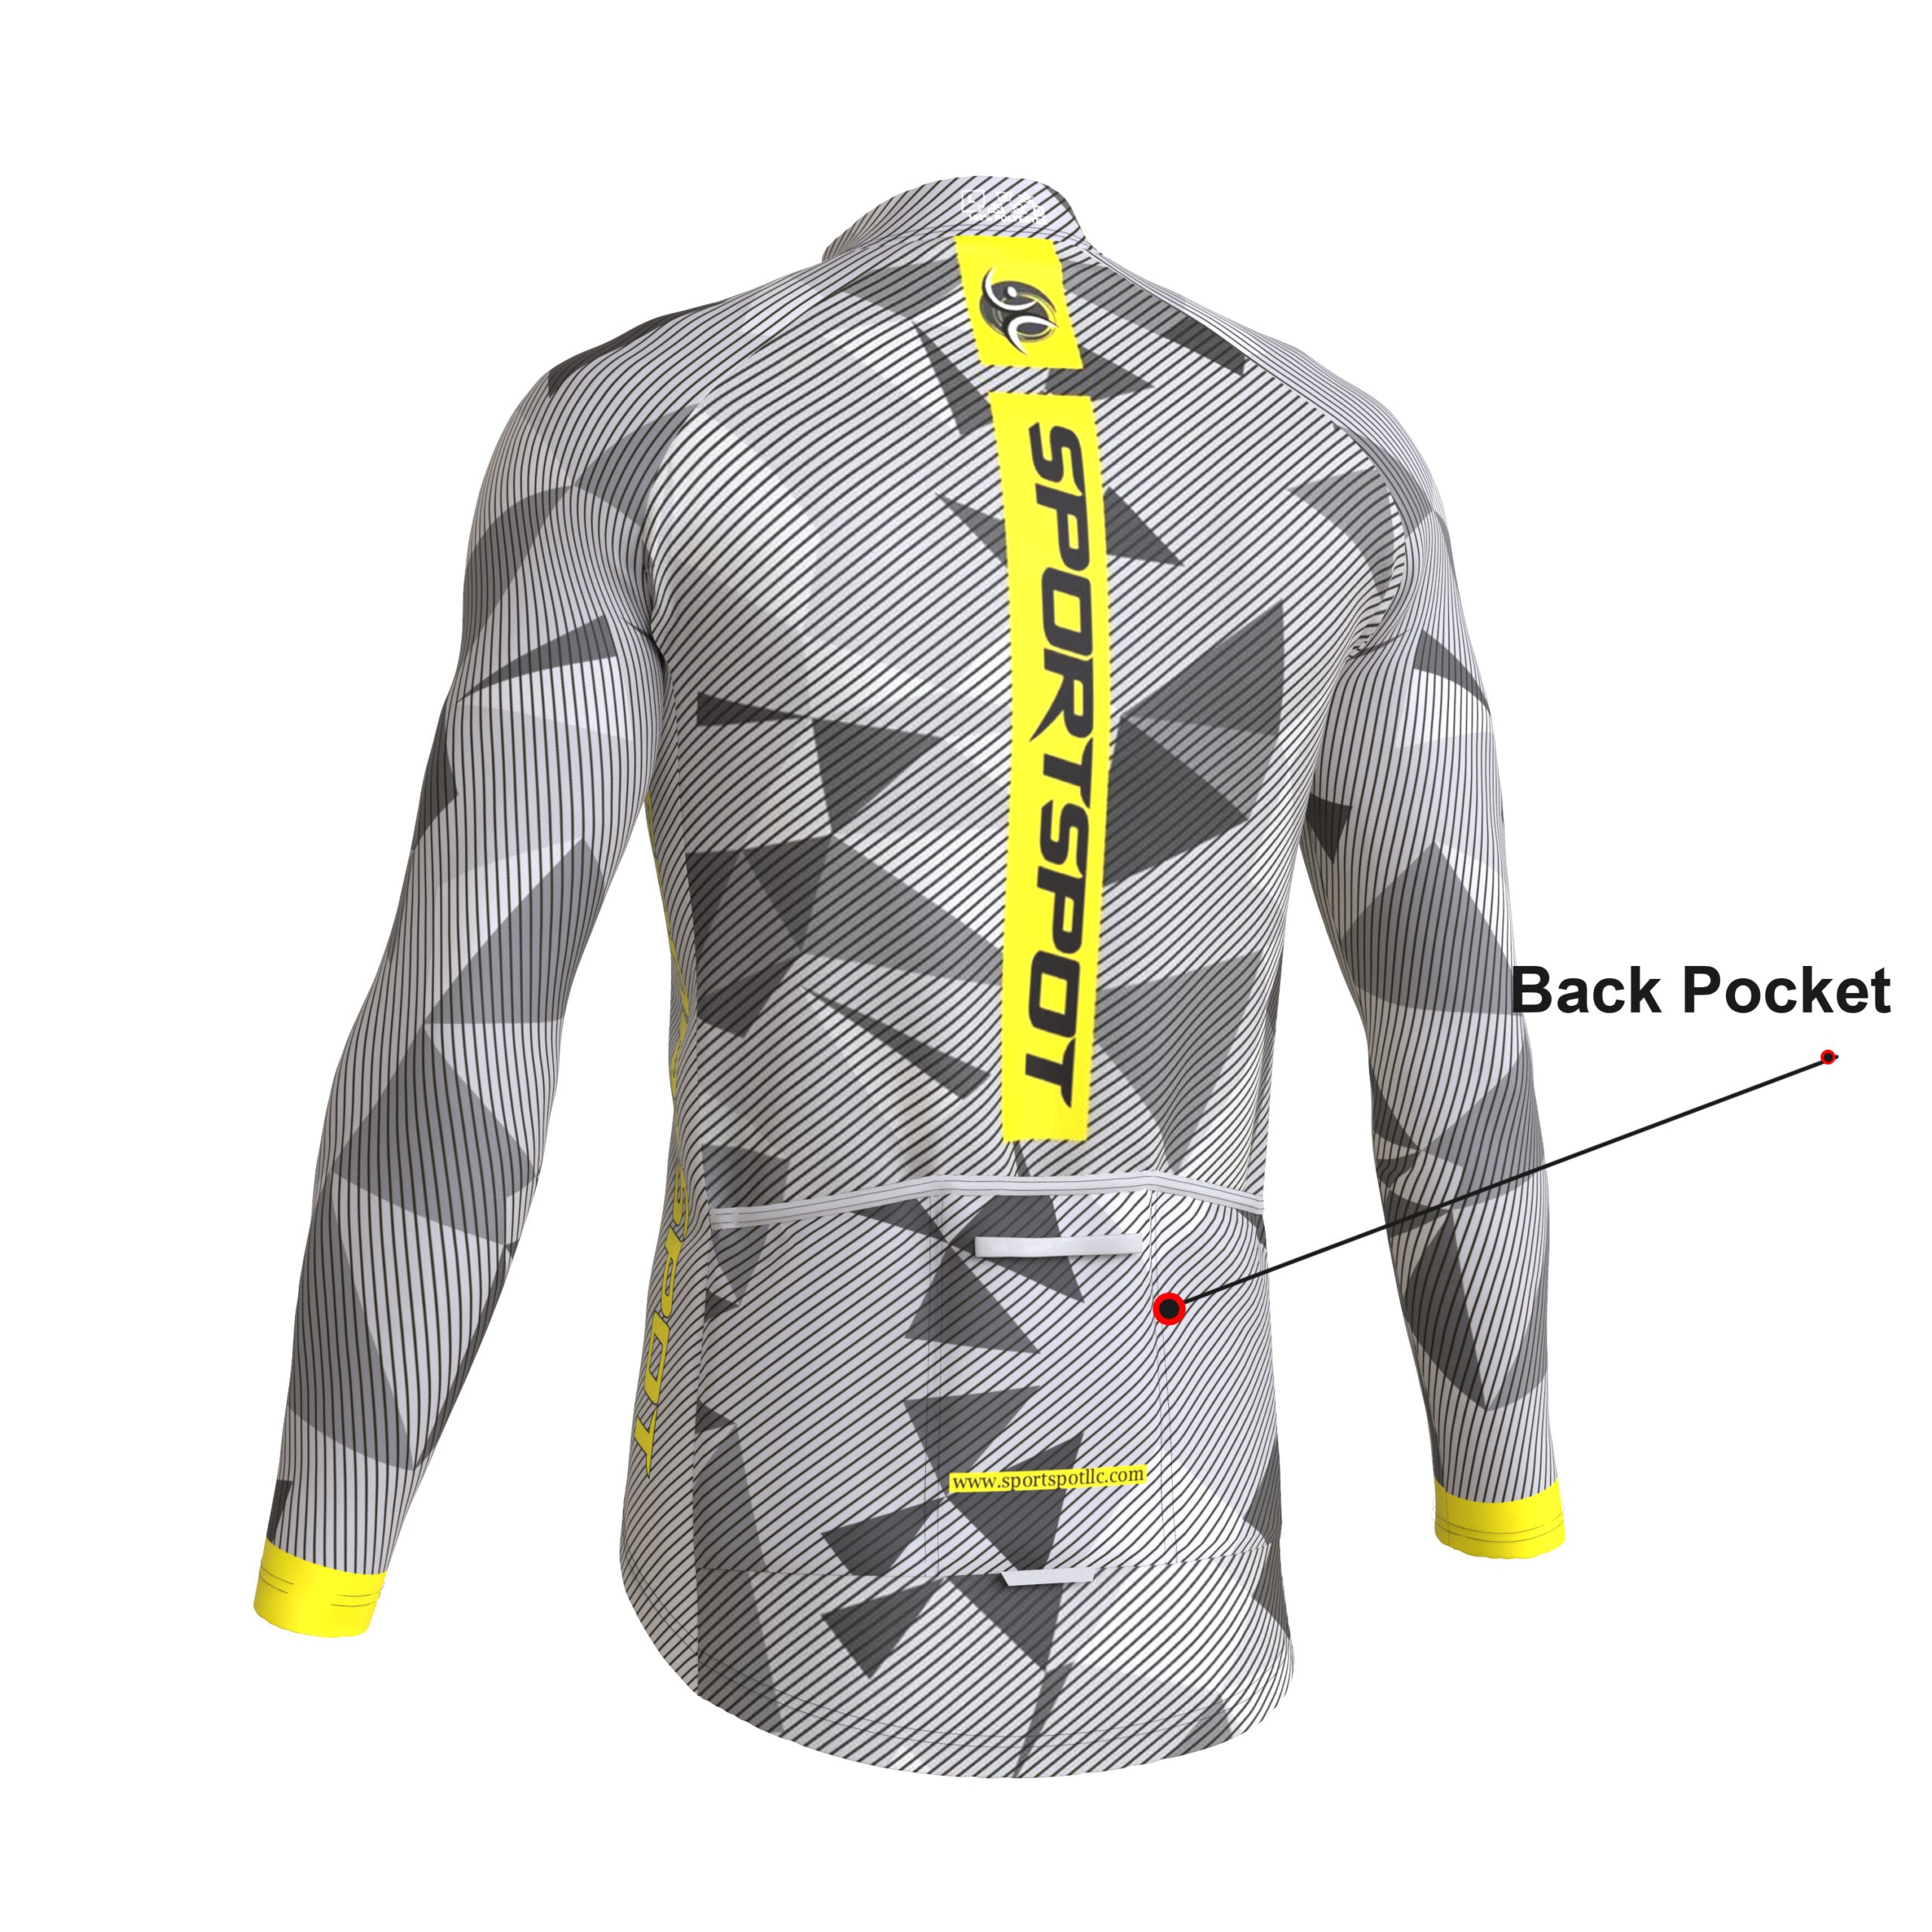 mud grey long sleeve cycling jersey with back pockets